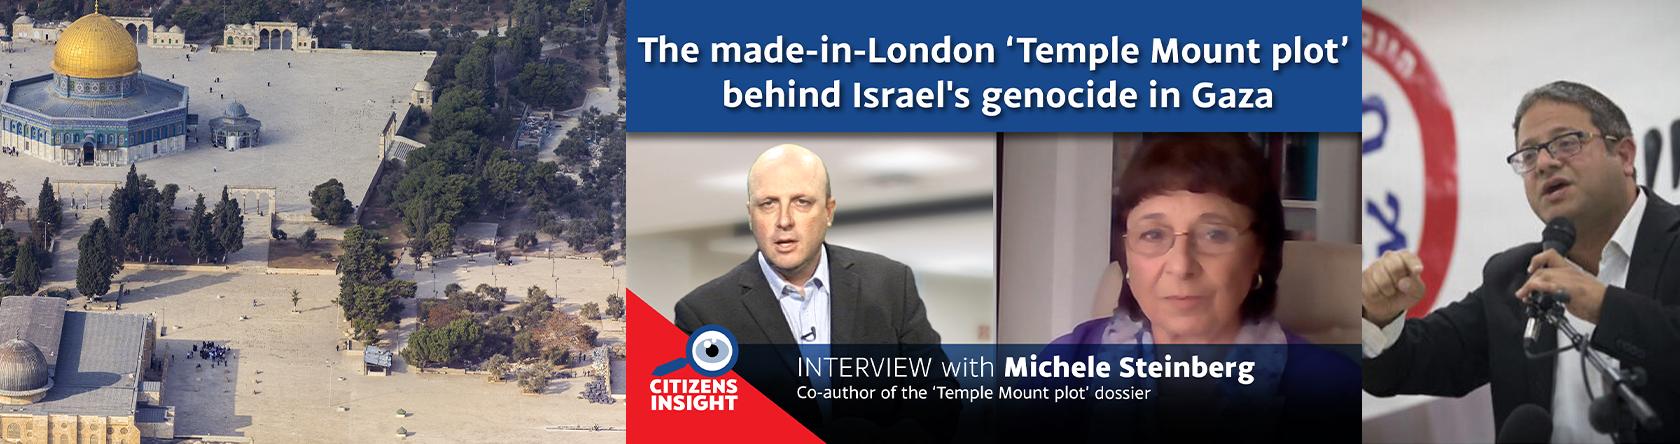 London’s 'Temple Mount Plot' behind Israel's genocide in Gaza - Interview with Michele Steinberg